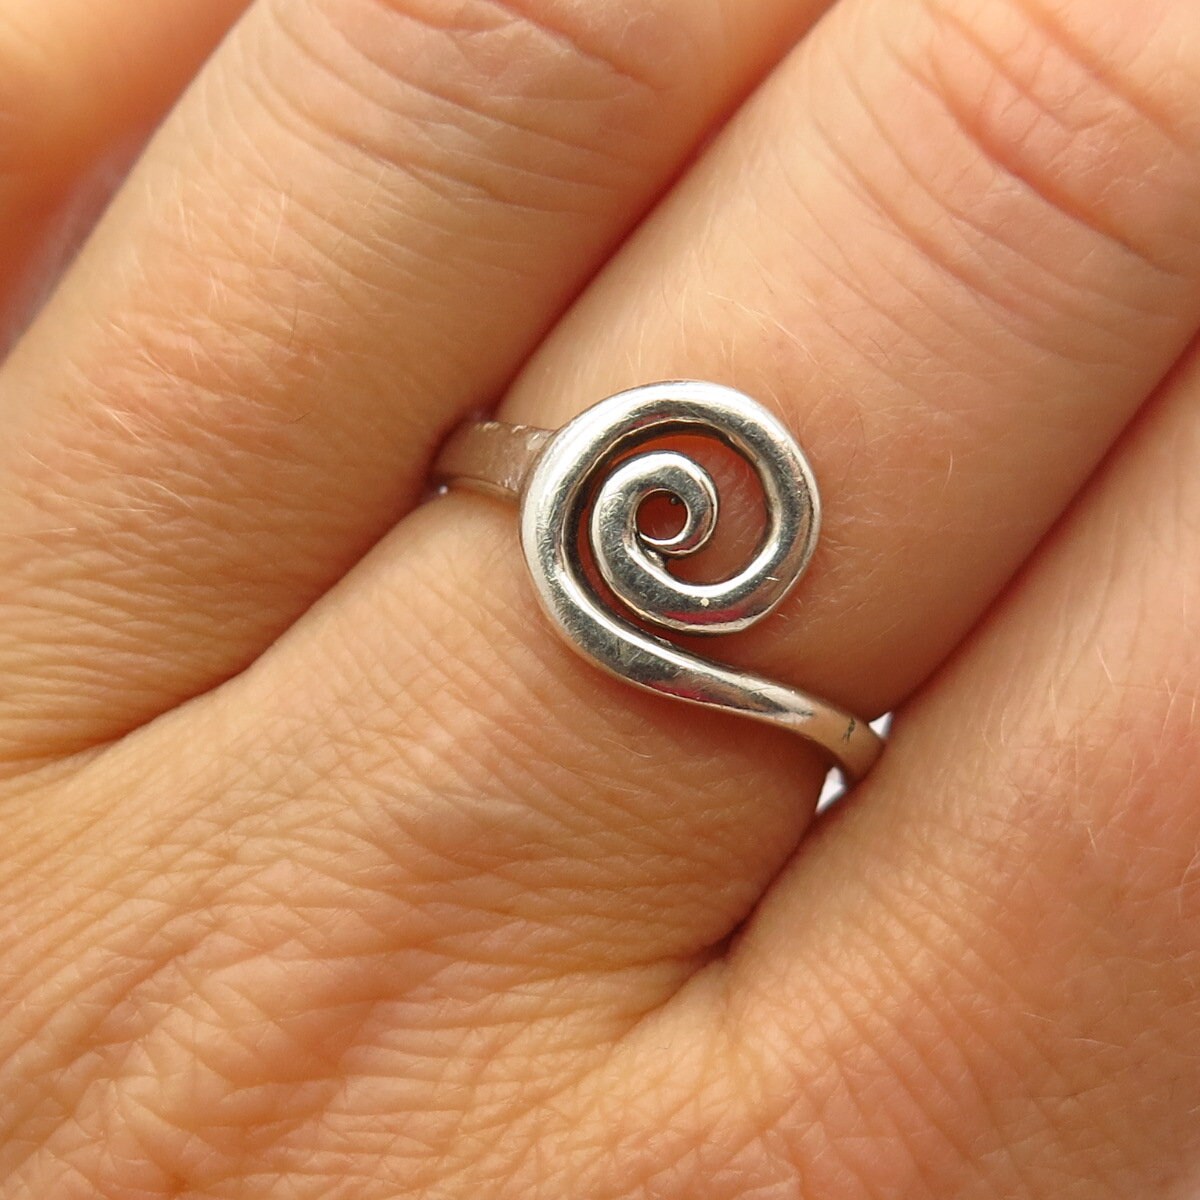 Details about    Pretty Swirl Design Ring Sterling Silver .925 Sizes Avail  4,5,6,7,8,9,10,11,